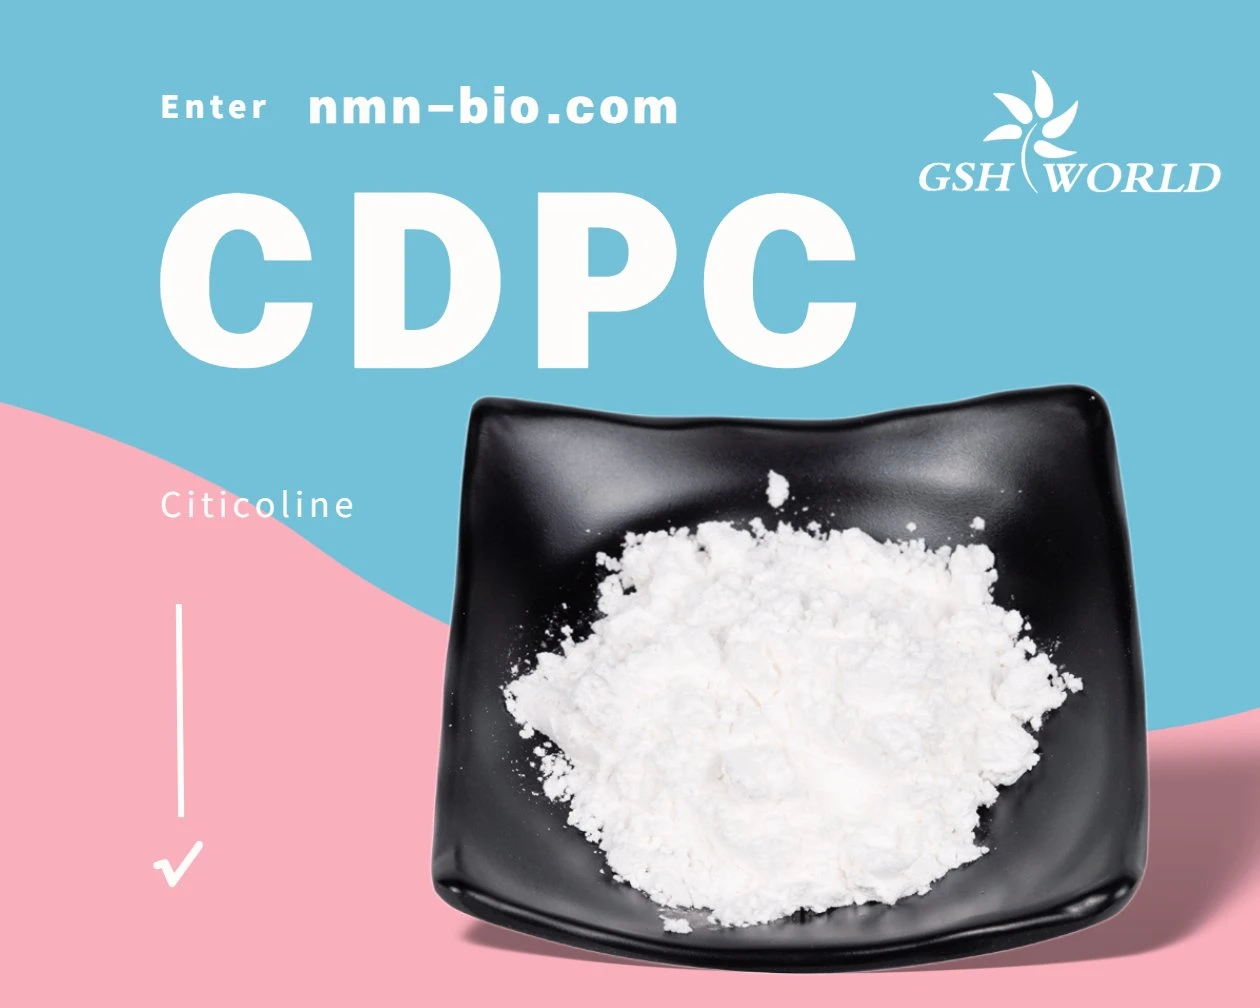 Citicoline raw material: A Natural Ingredient with Numerous Health Benefits